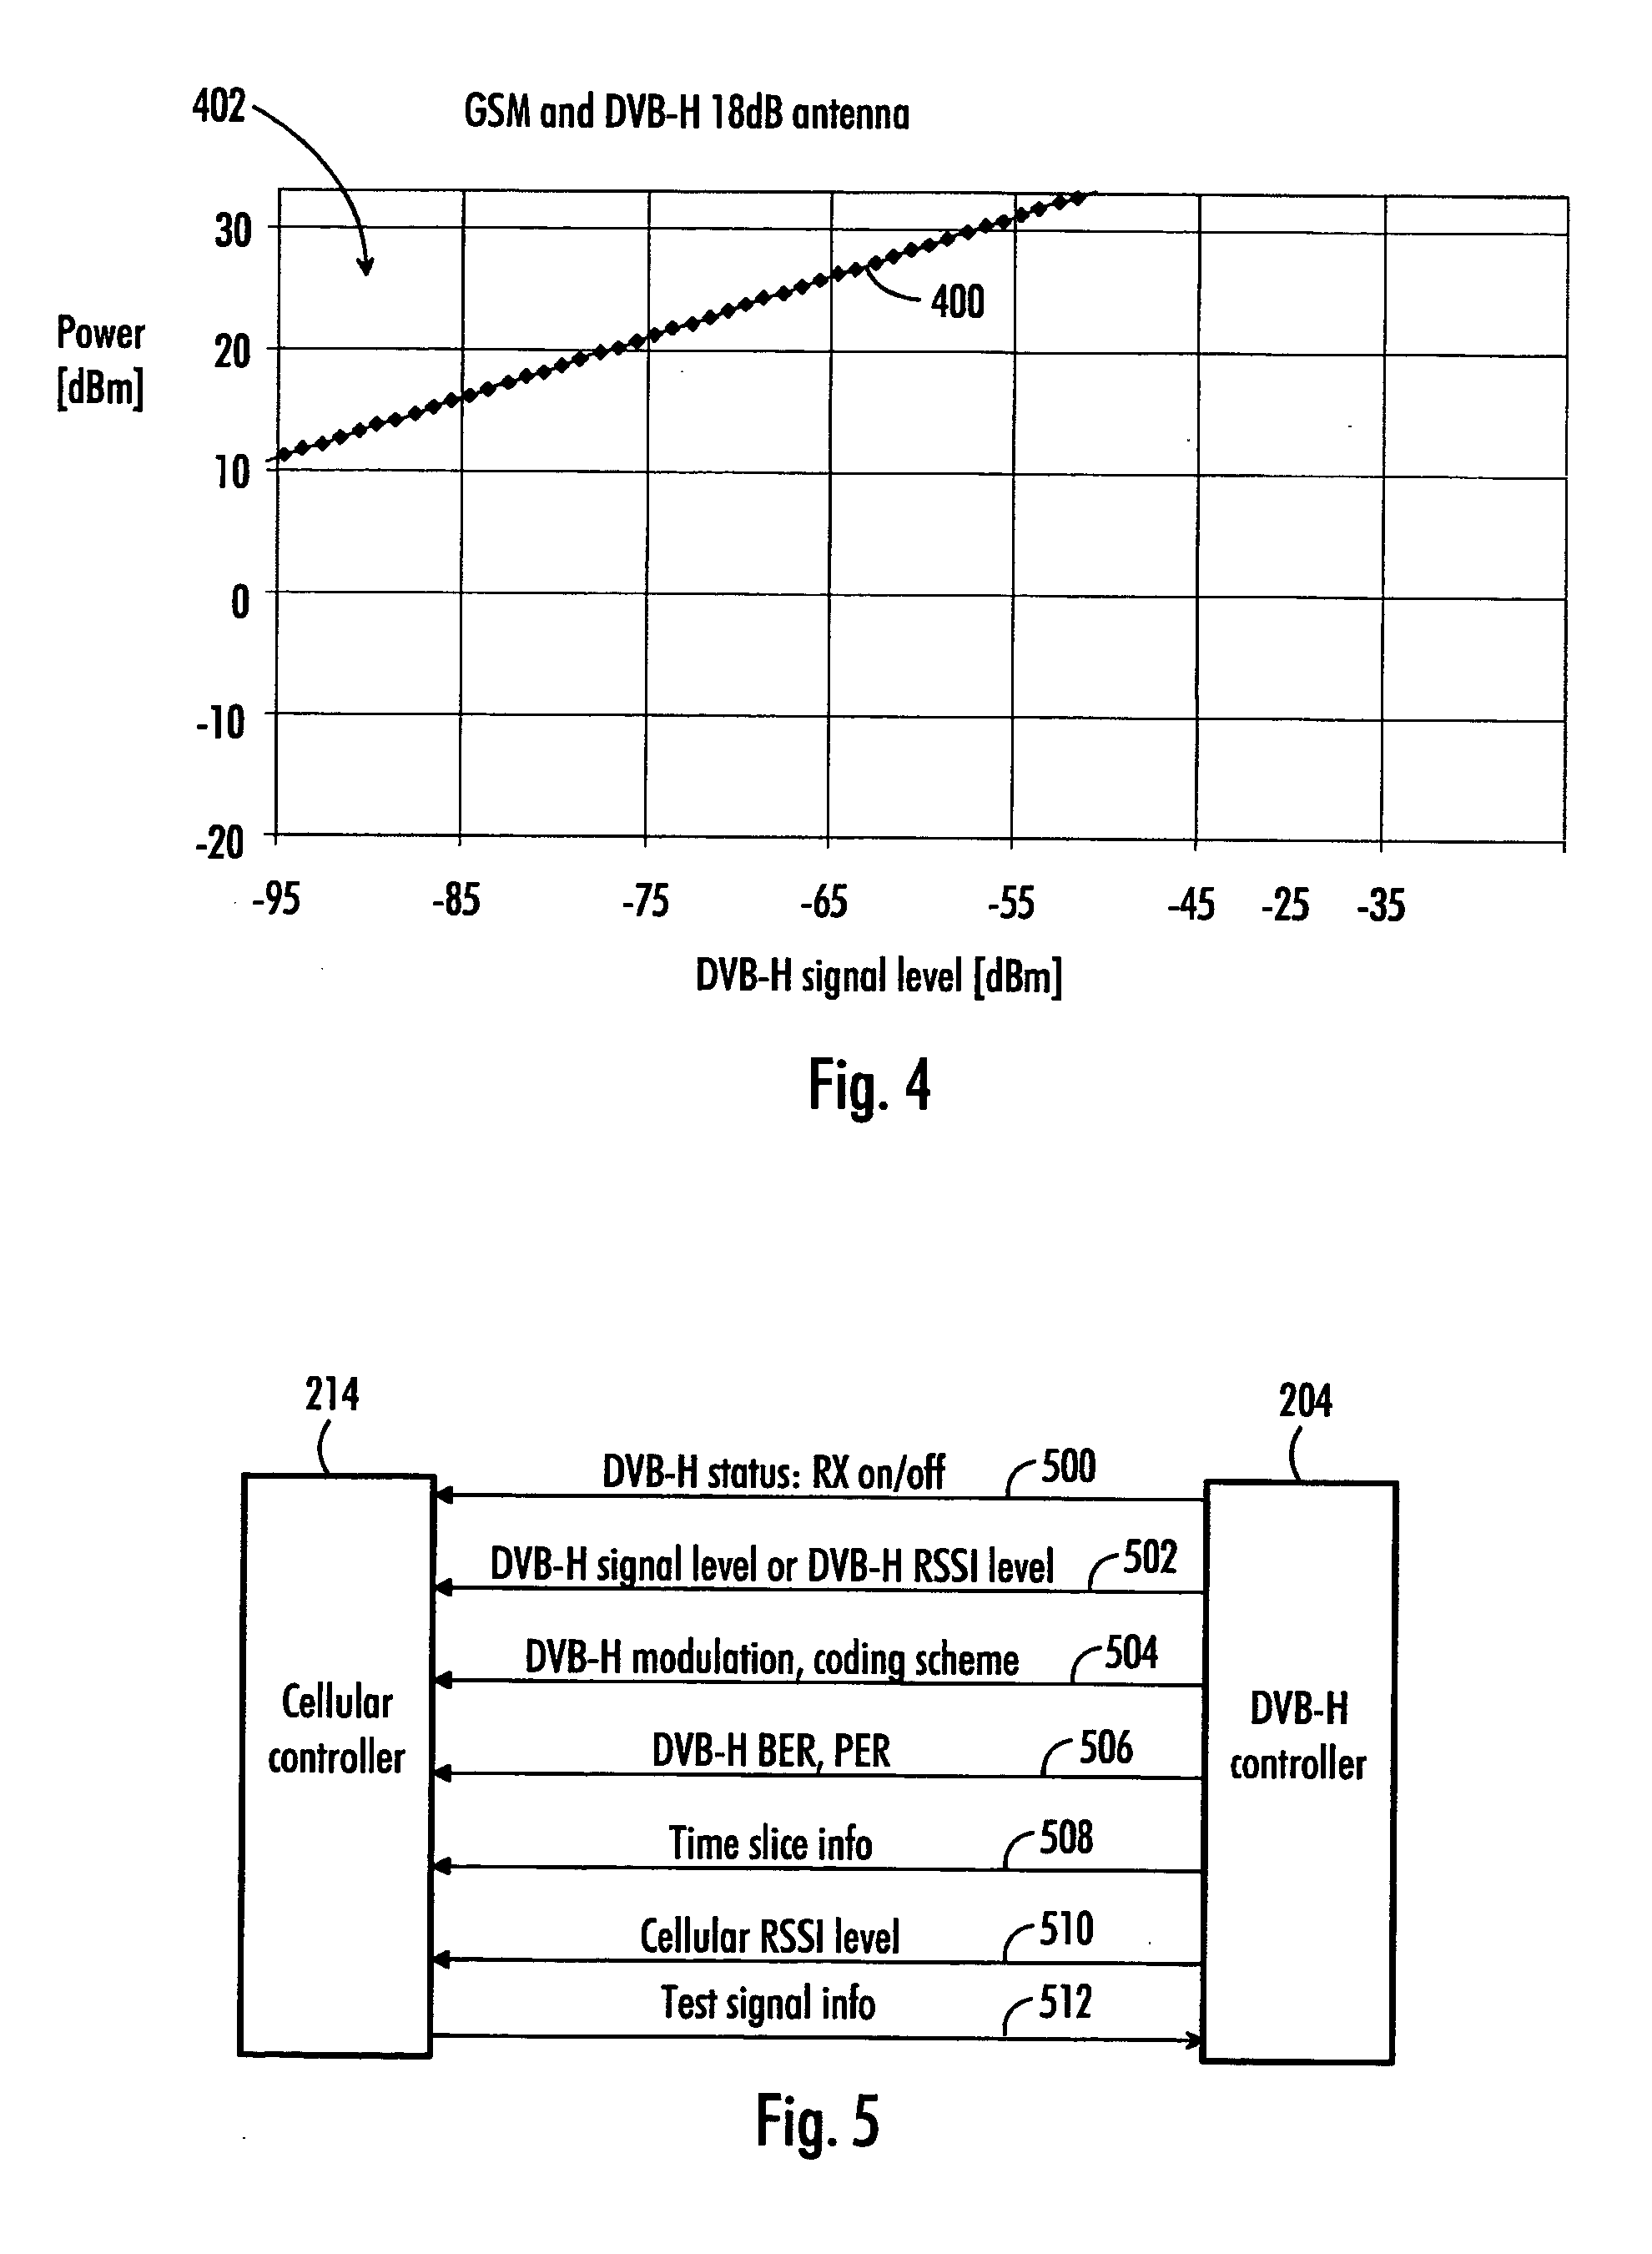 Operating multi-service receiver in non-interfering manner